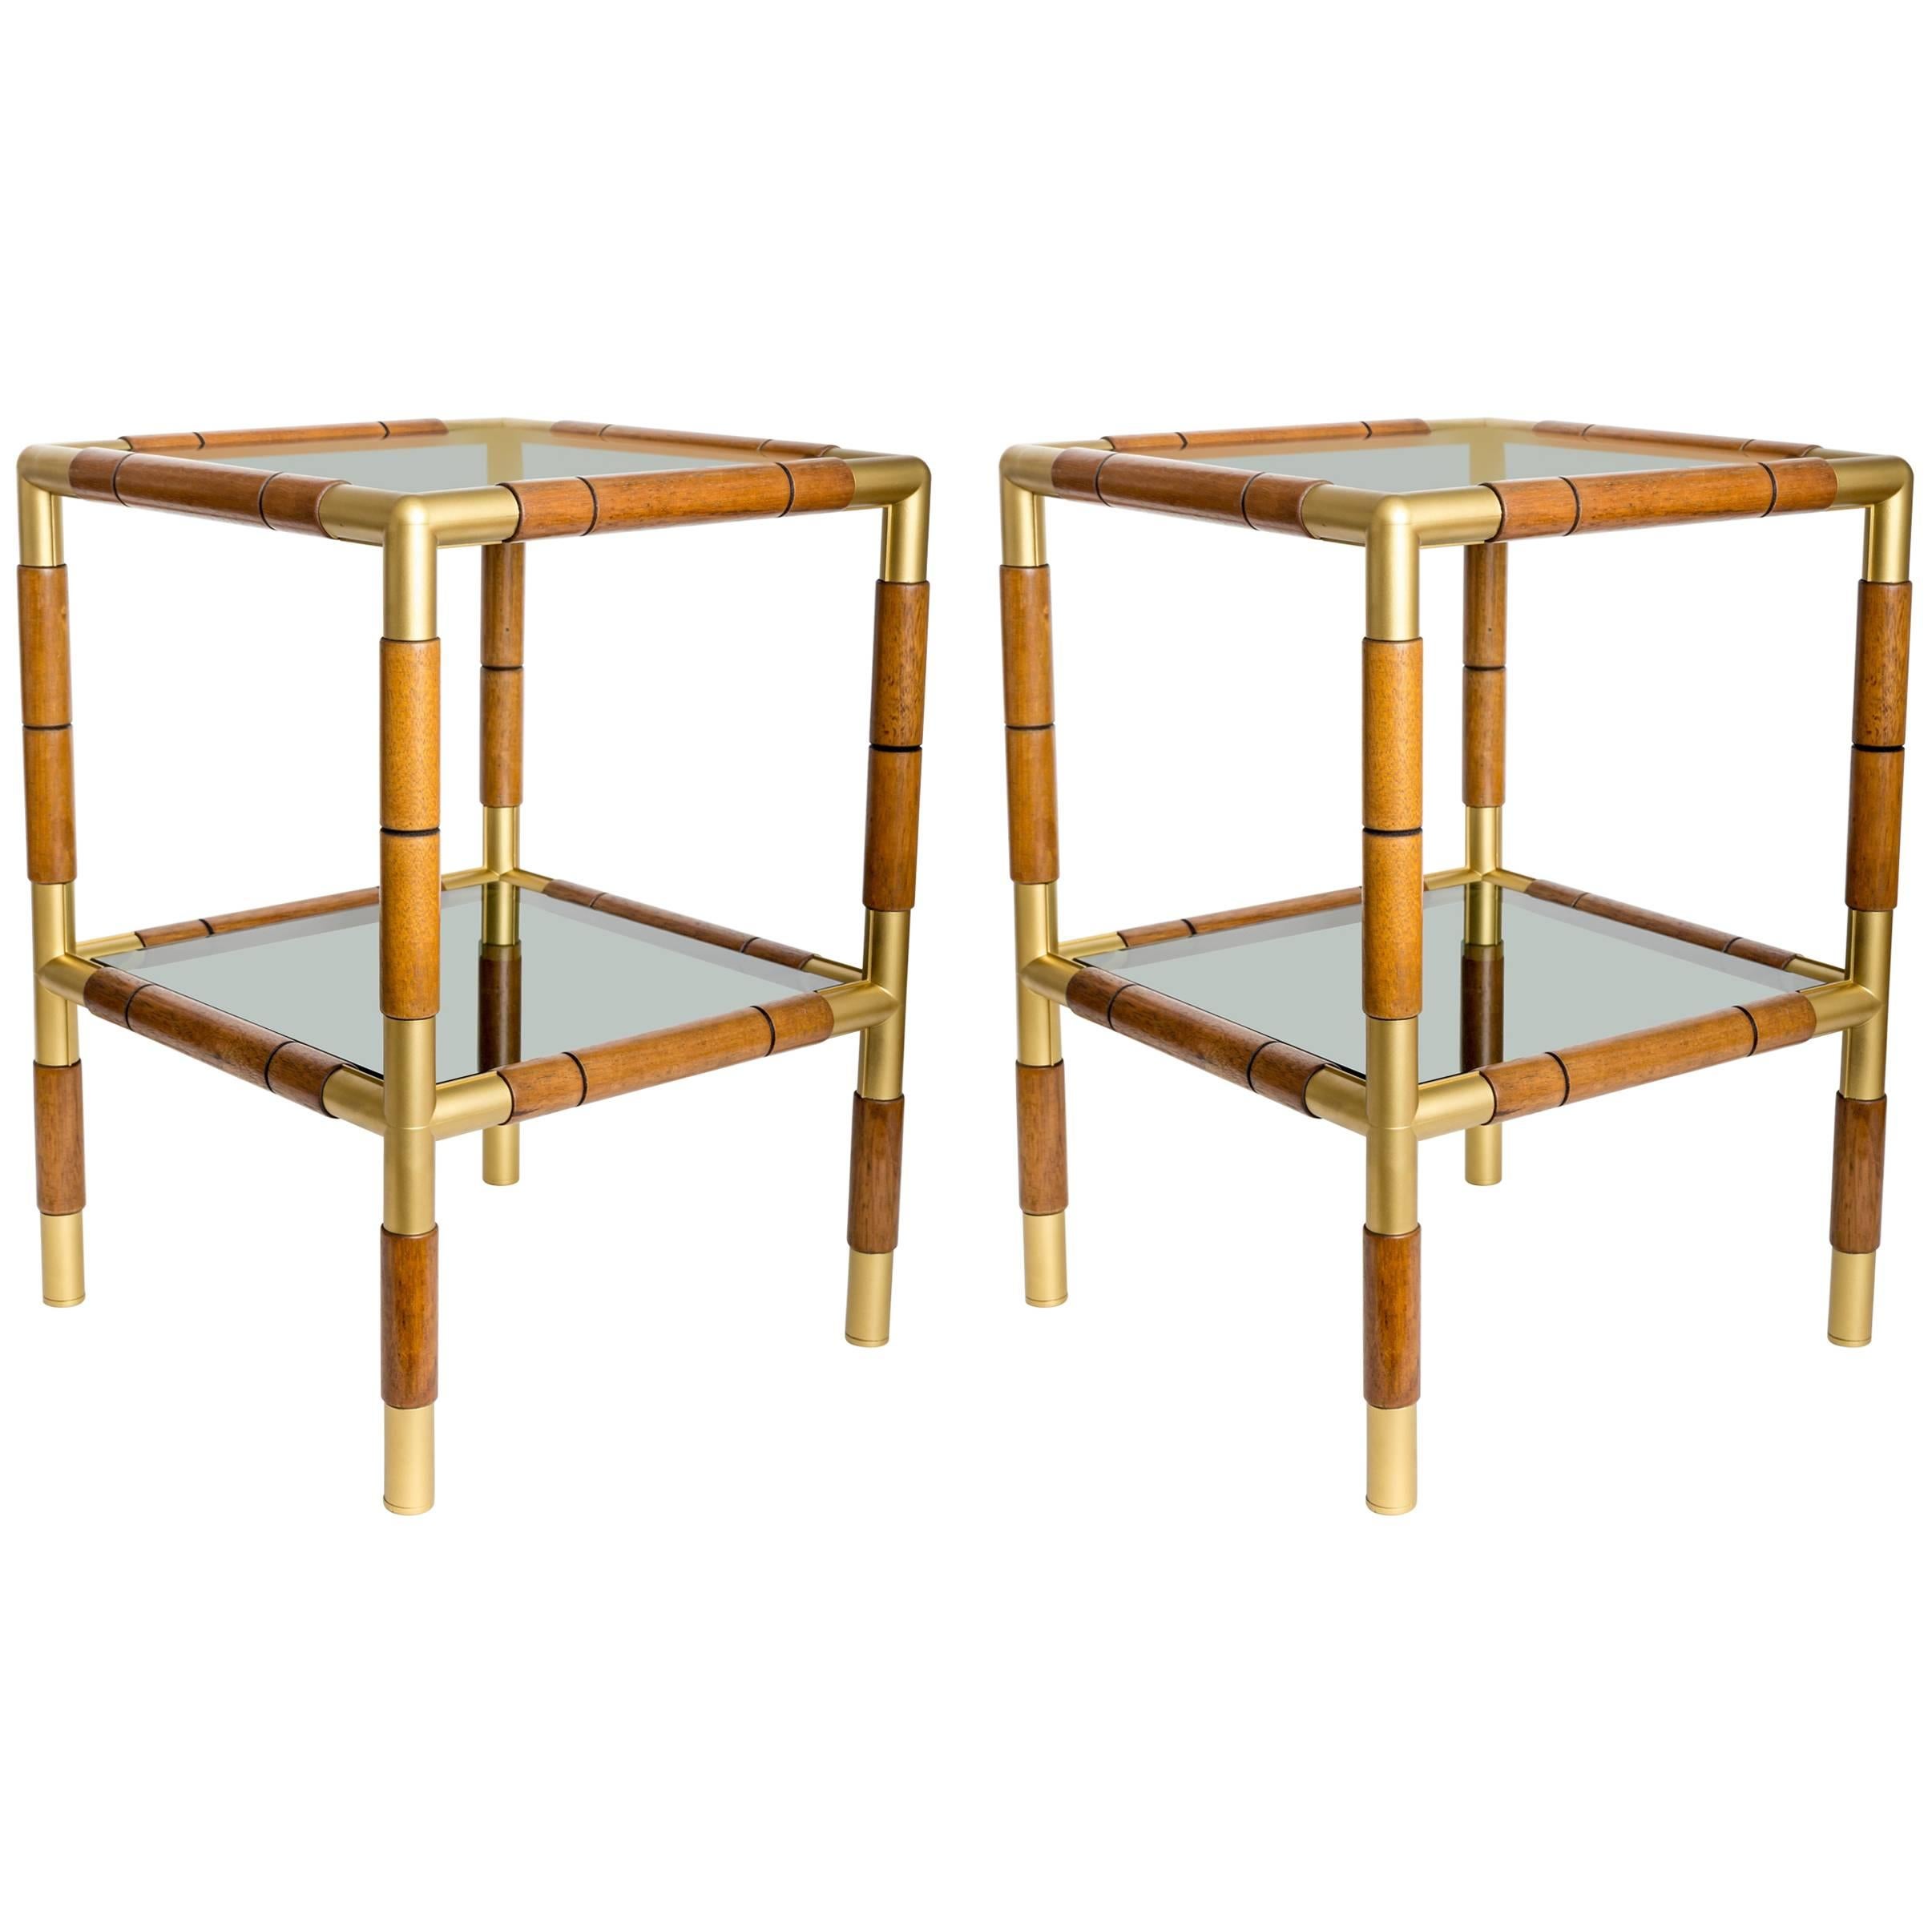 Pair of Wood, Metal and Tinted Glass Side Tables with Two Shelves